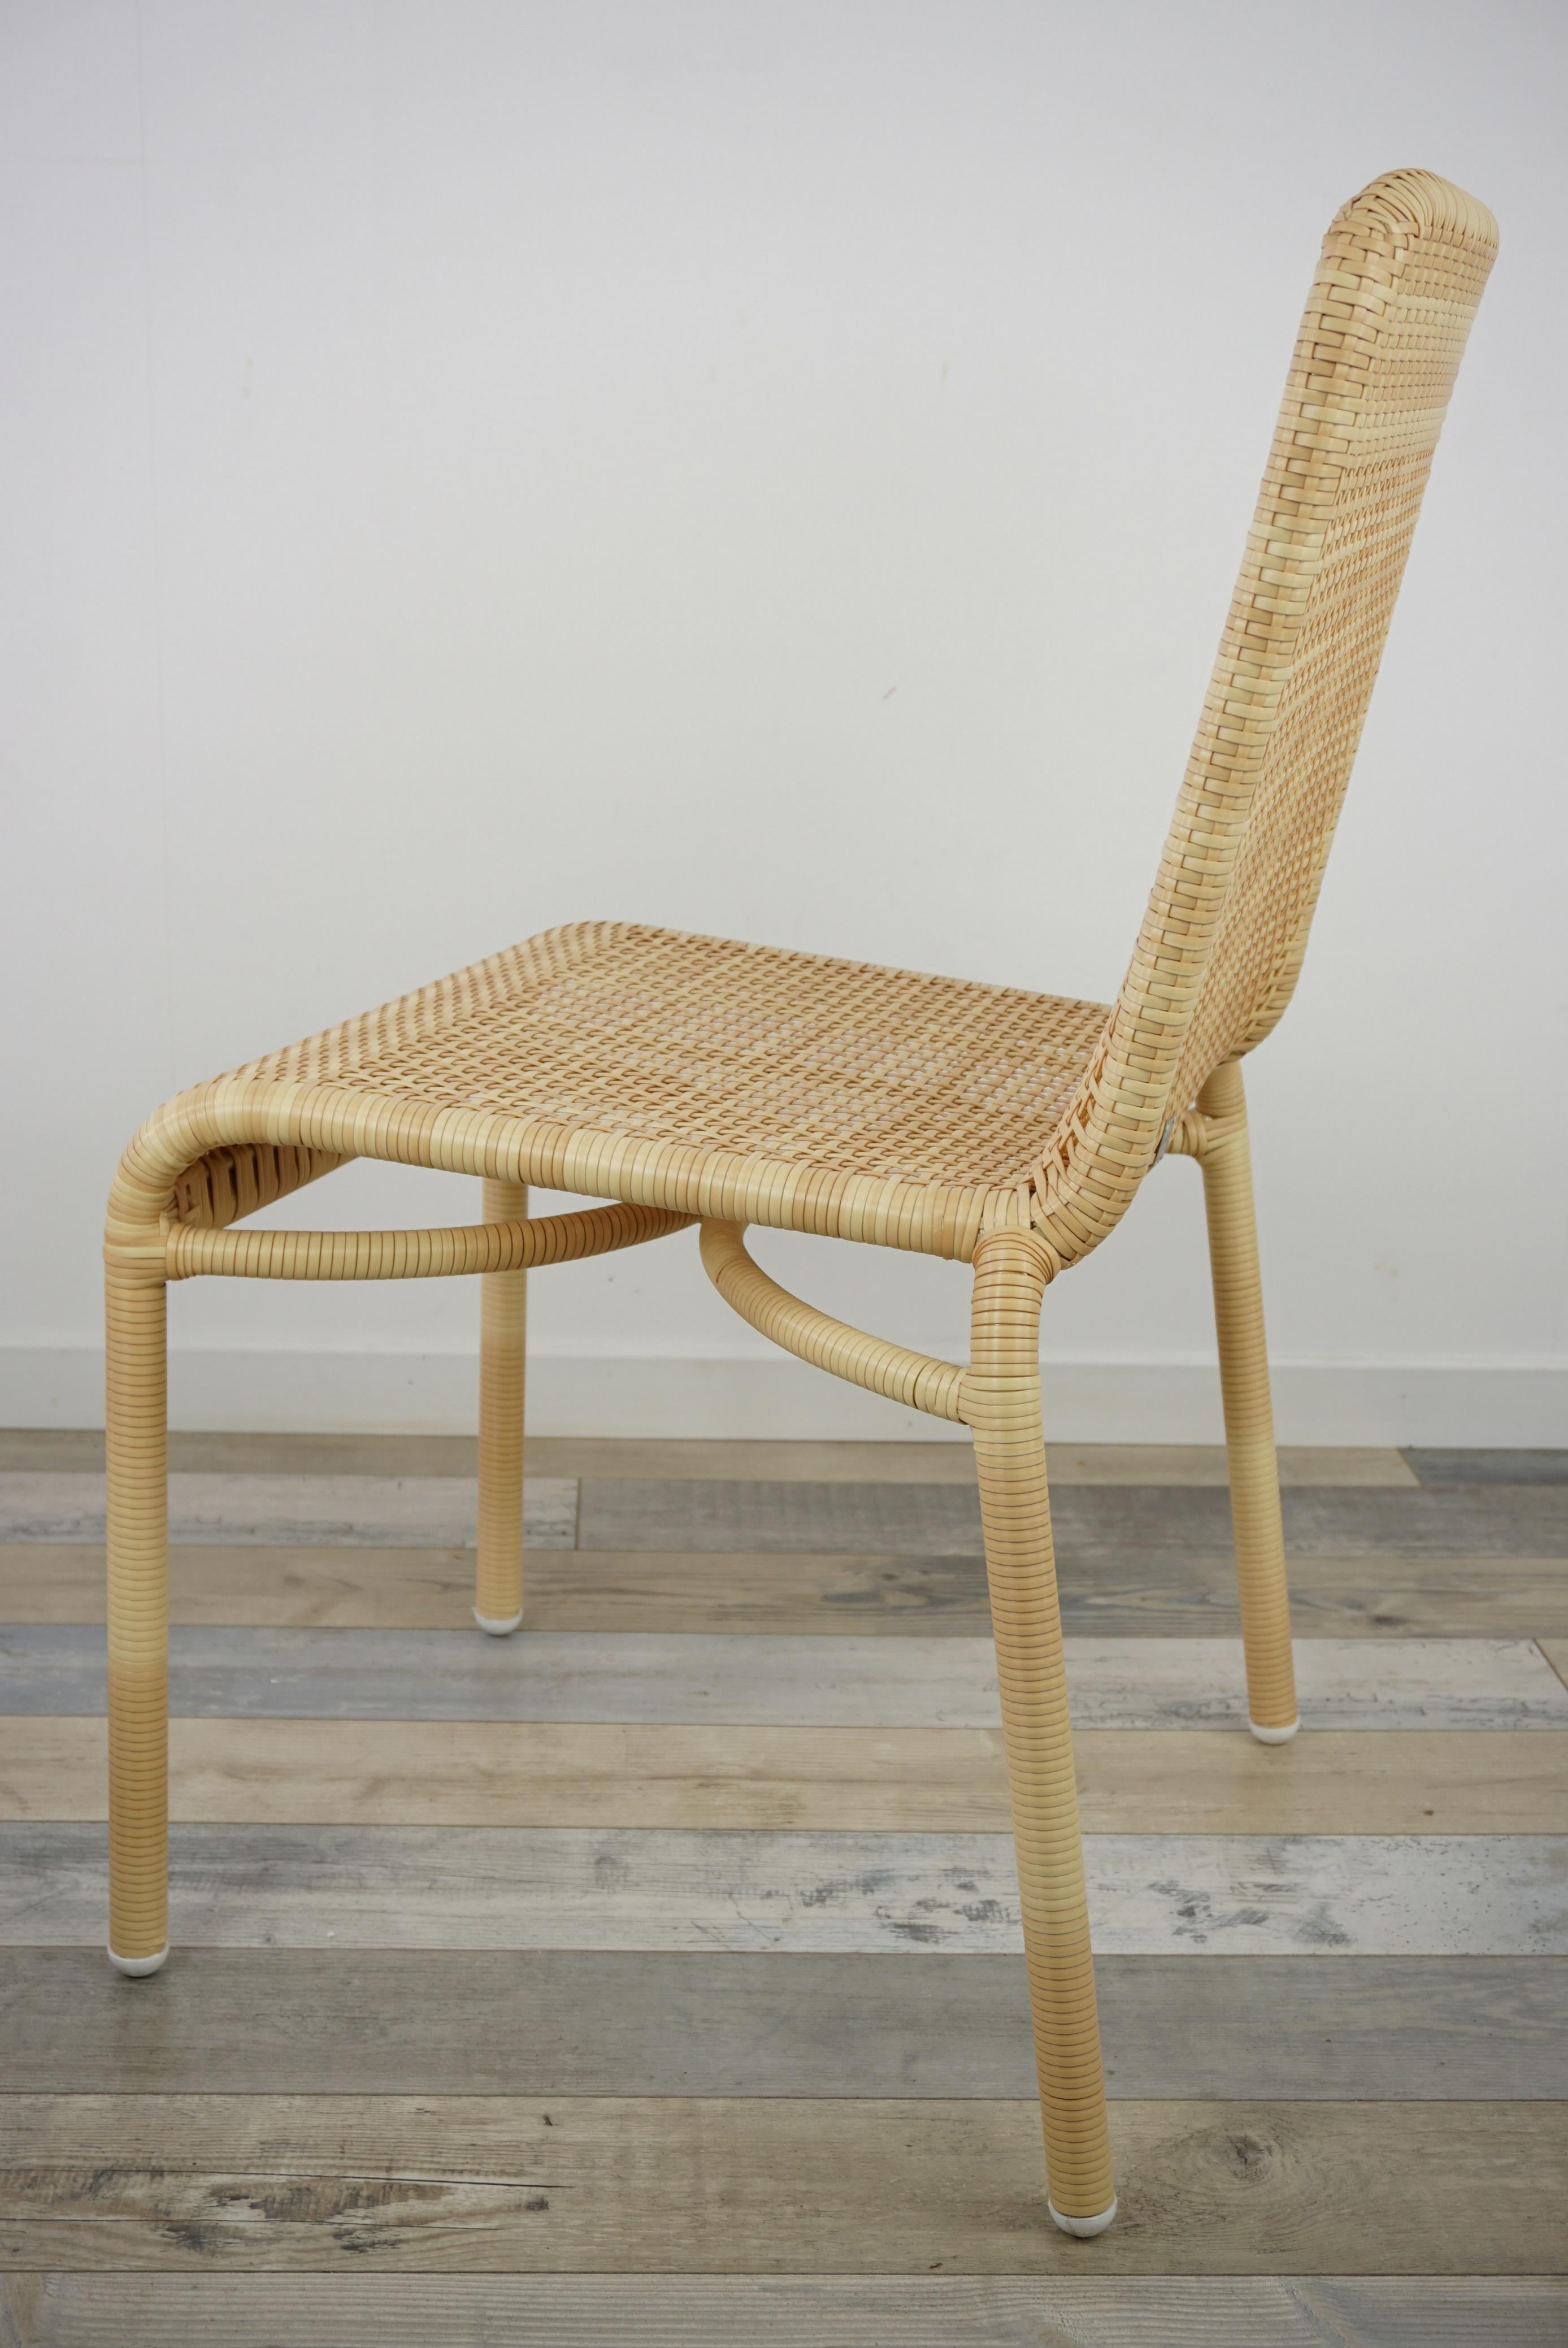 Rattan Effect Braided Resin Outdoor Chair In New Condition For Sale In Tourcoing, FR